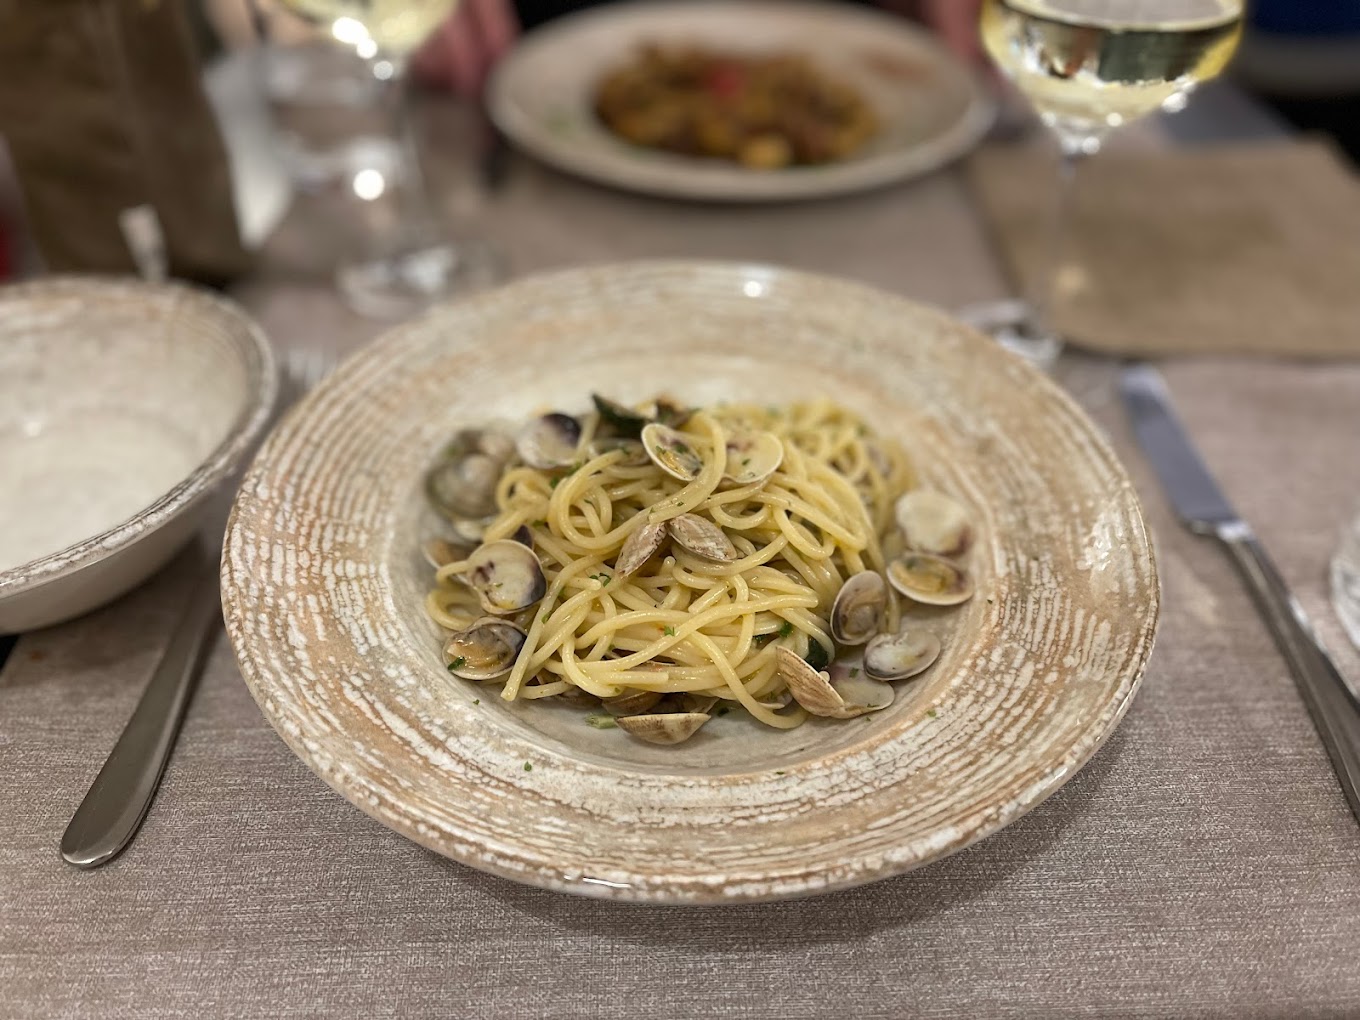 Image of a seafood dish at Osteria alle Testiere restaurant